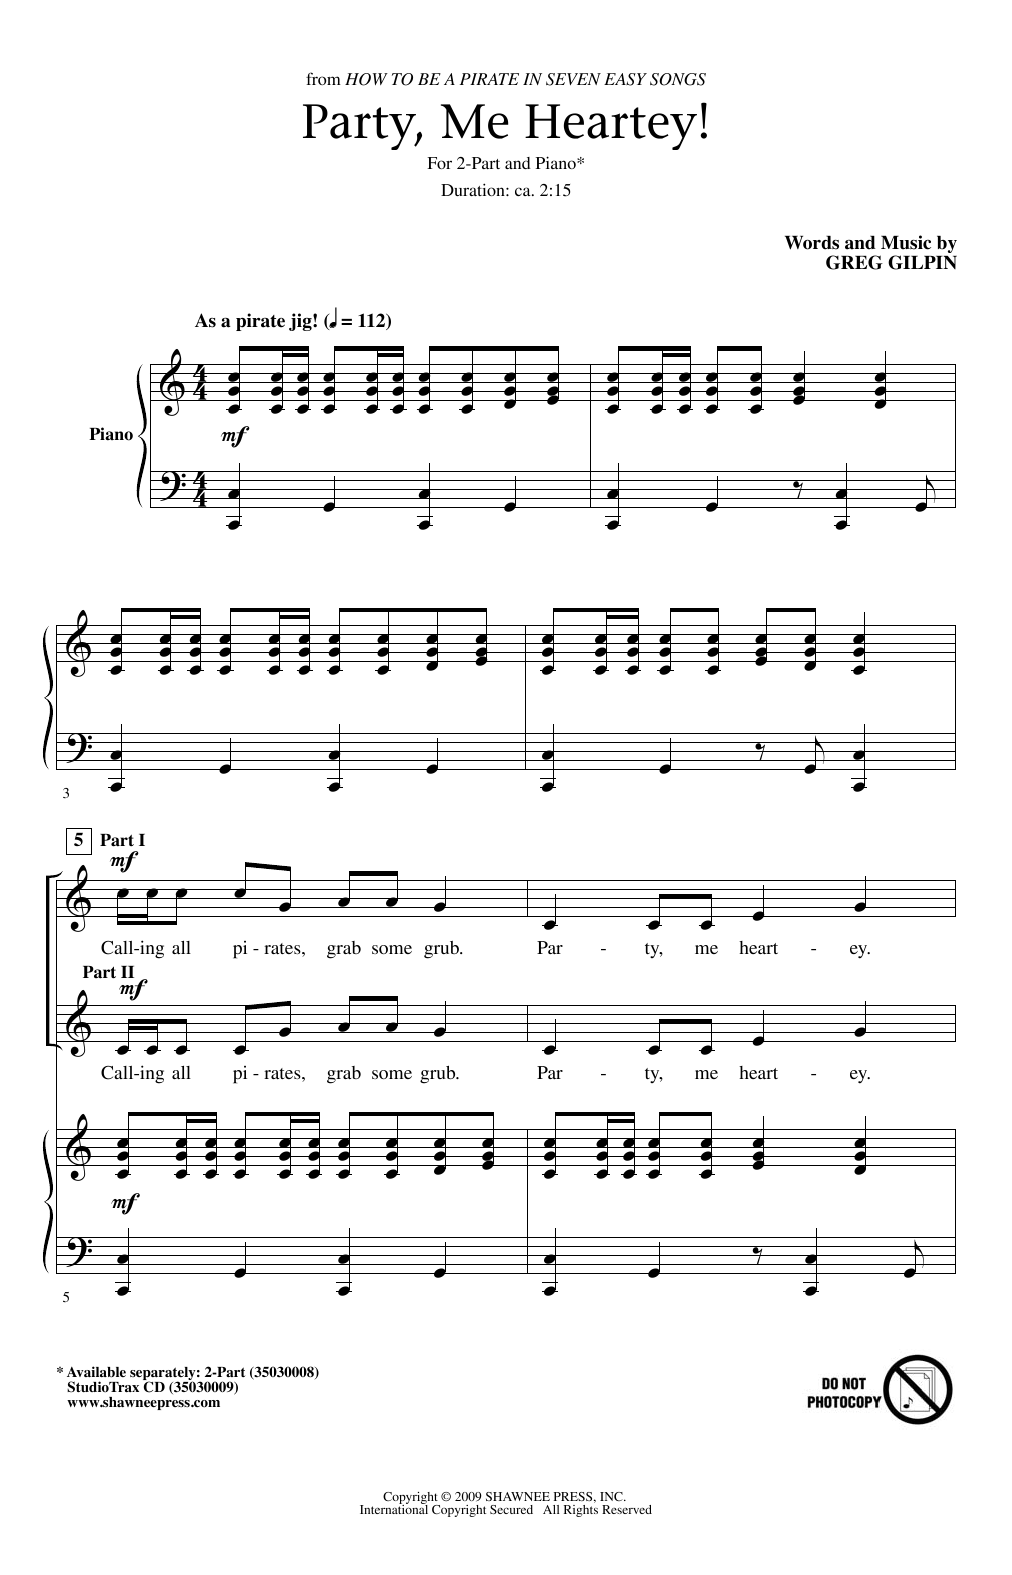 Download Greg Gilpin Party, Me Heartey Sheet Music